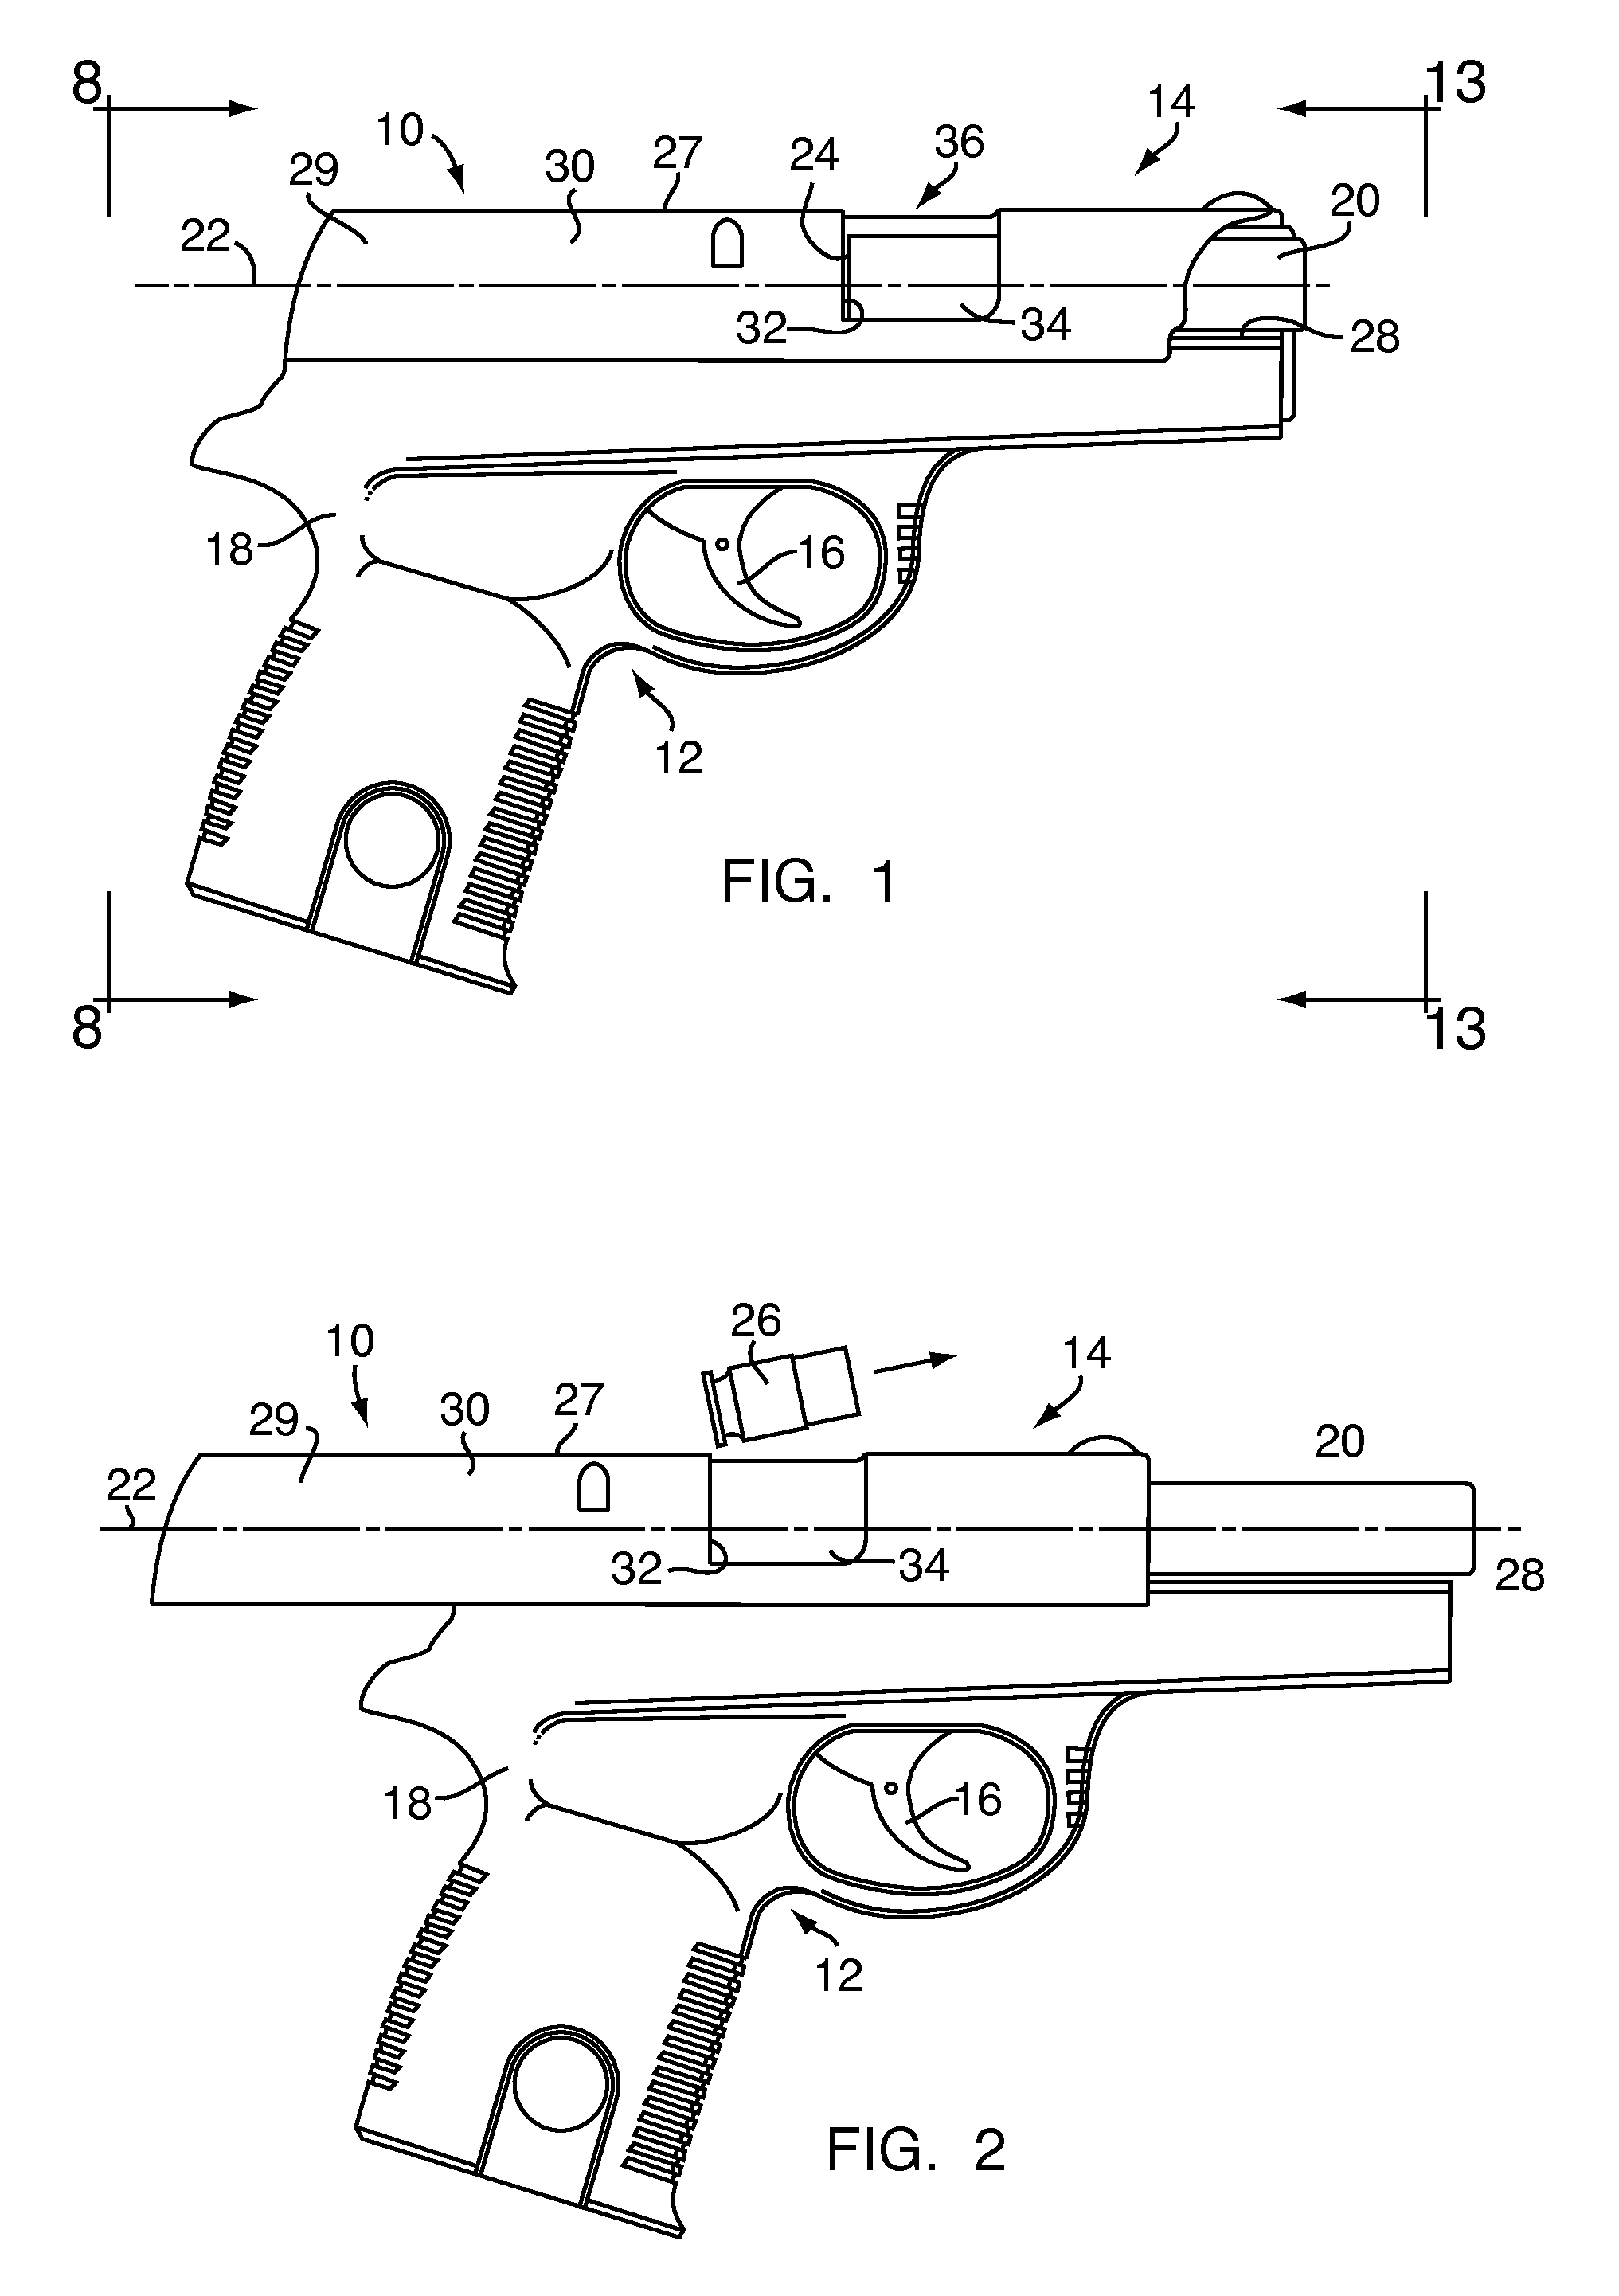 Automatic firing pin block safety for a firearm